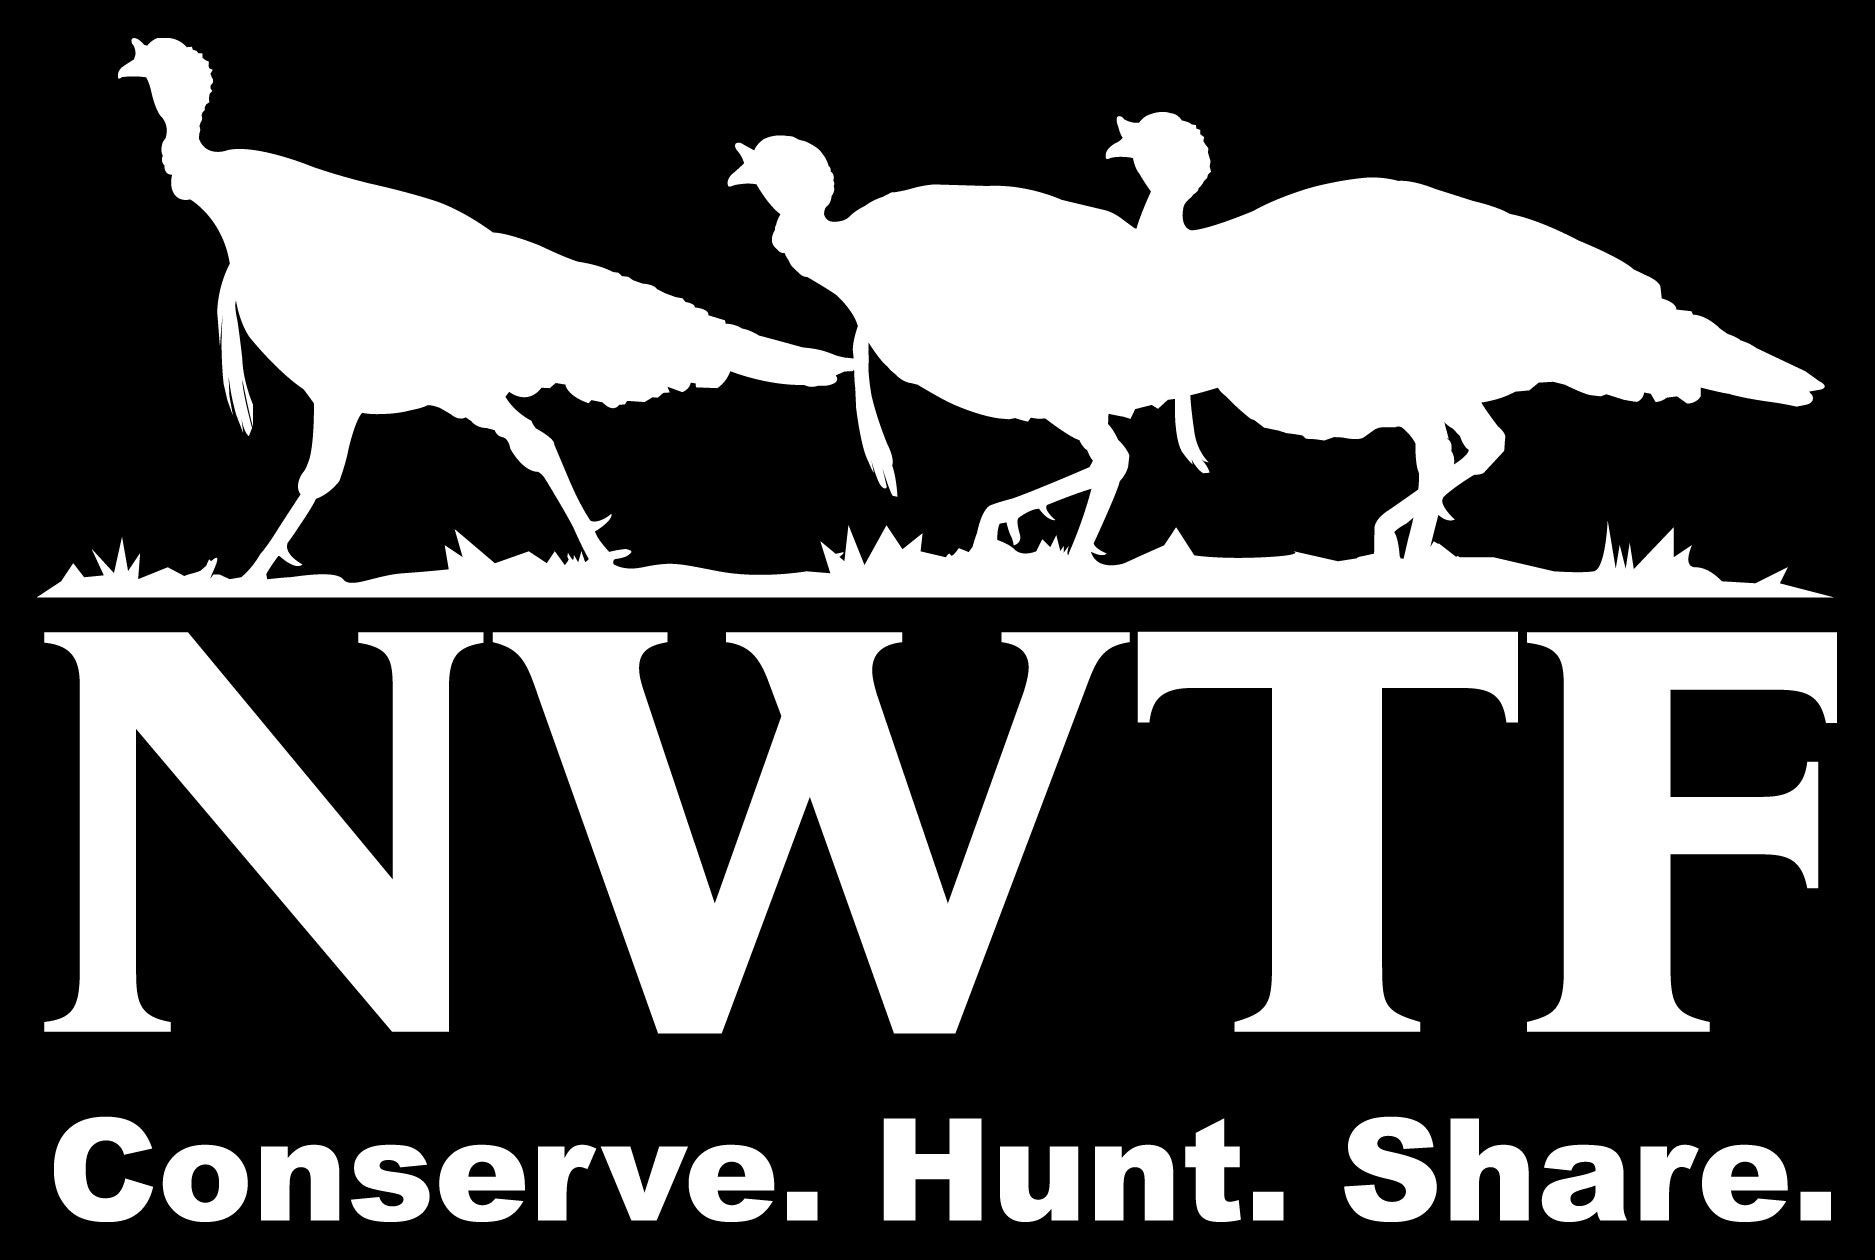 Nwtf Wallpaper Top Background